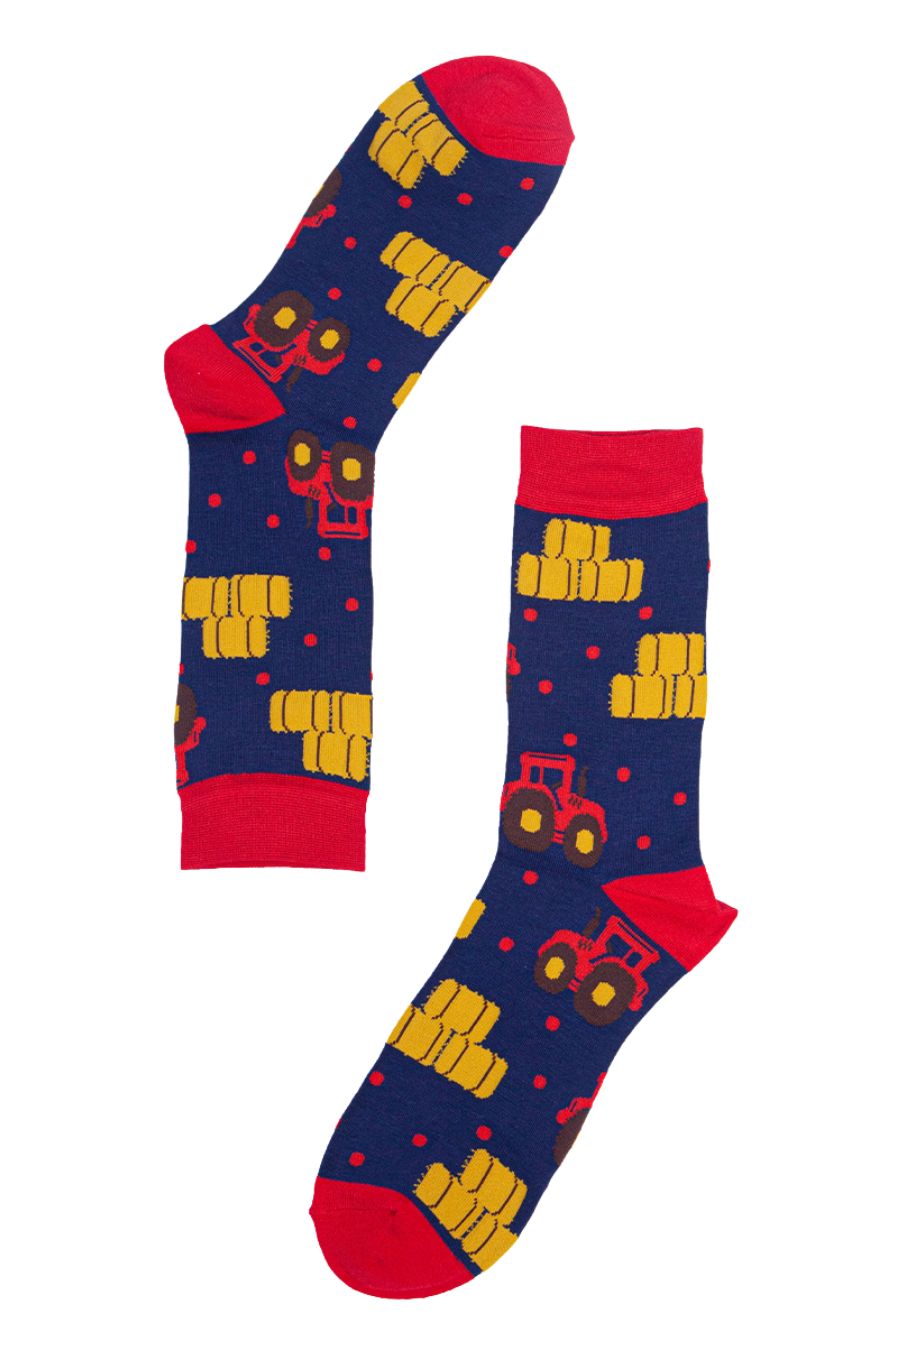 blue, red bamboo socks with red tractors